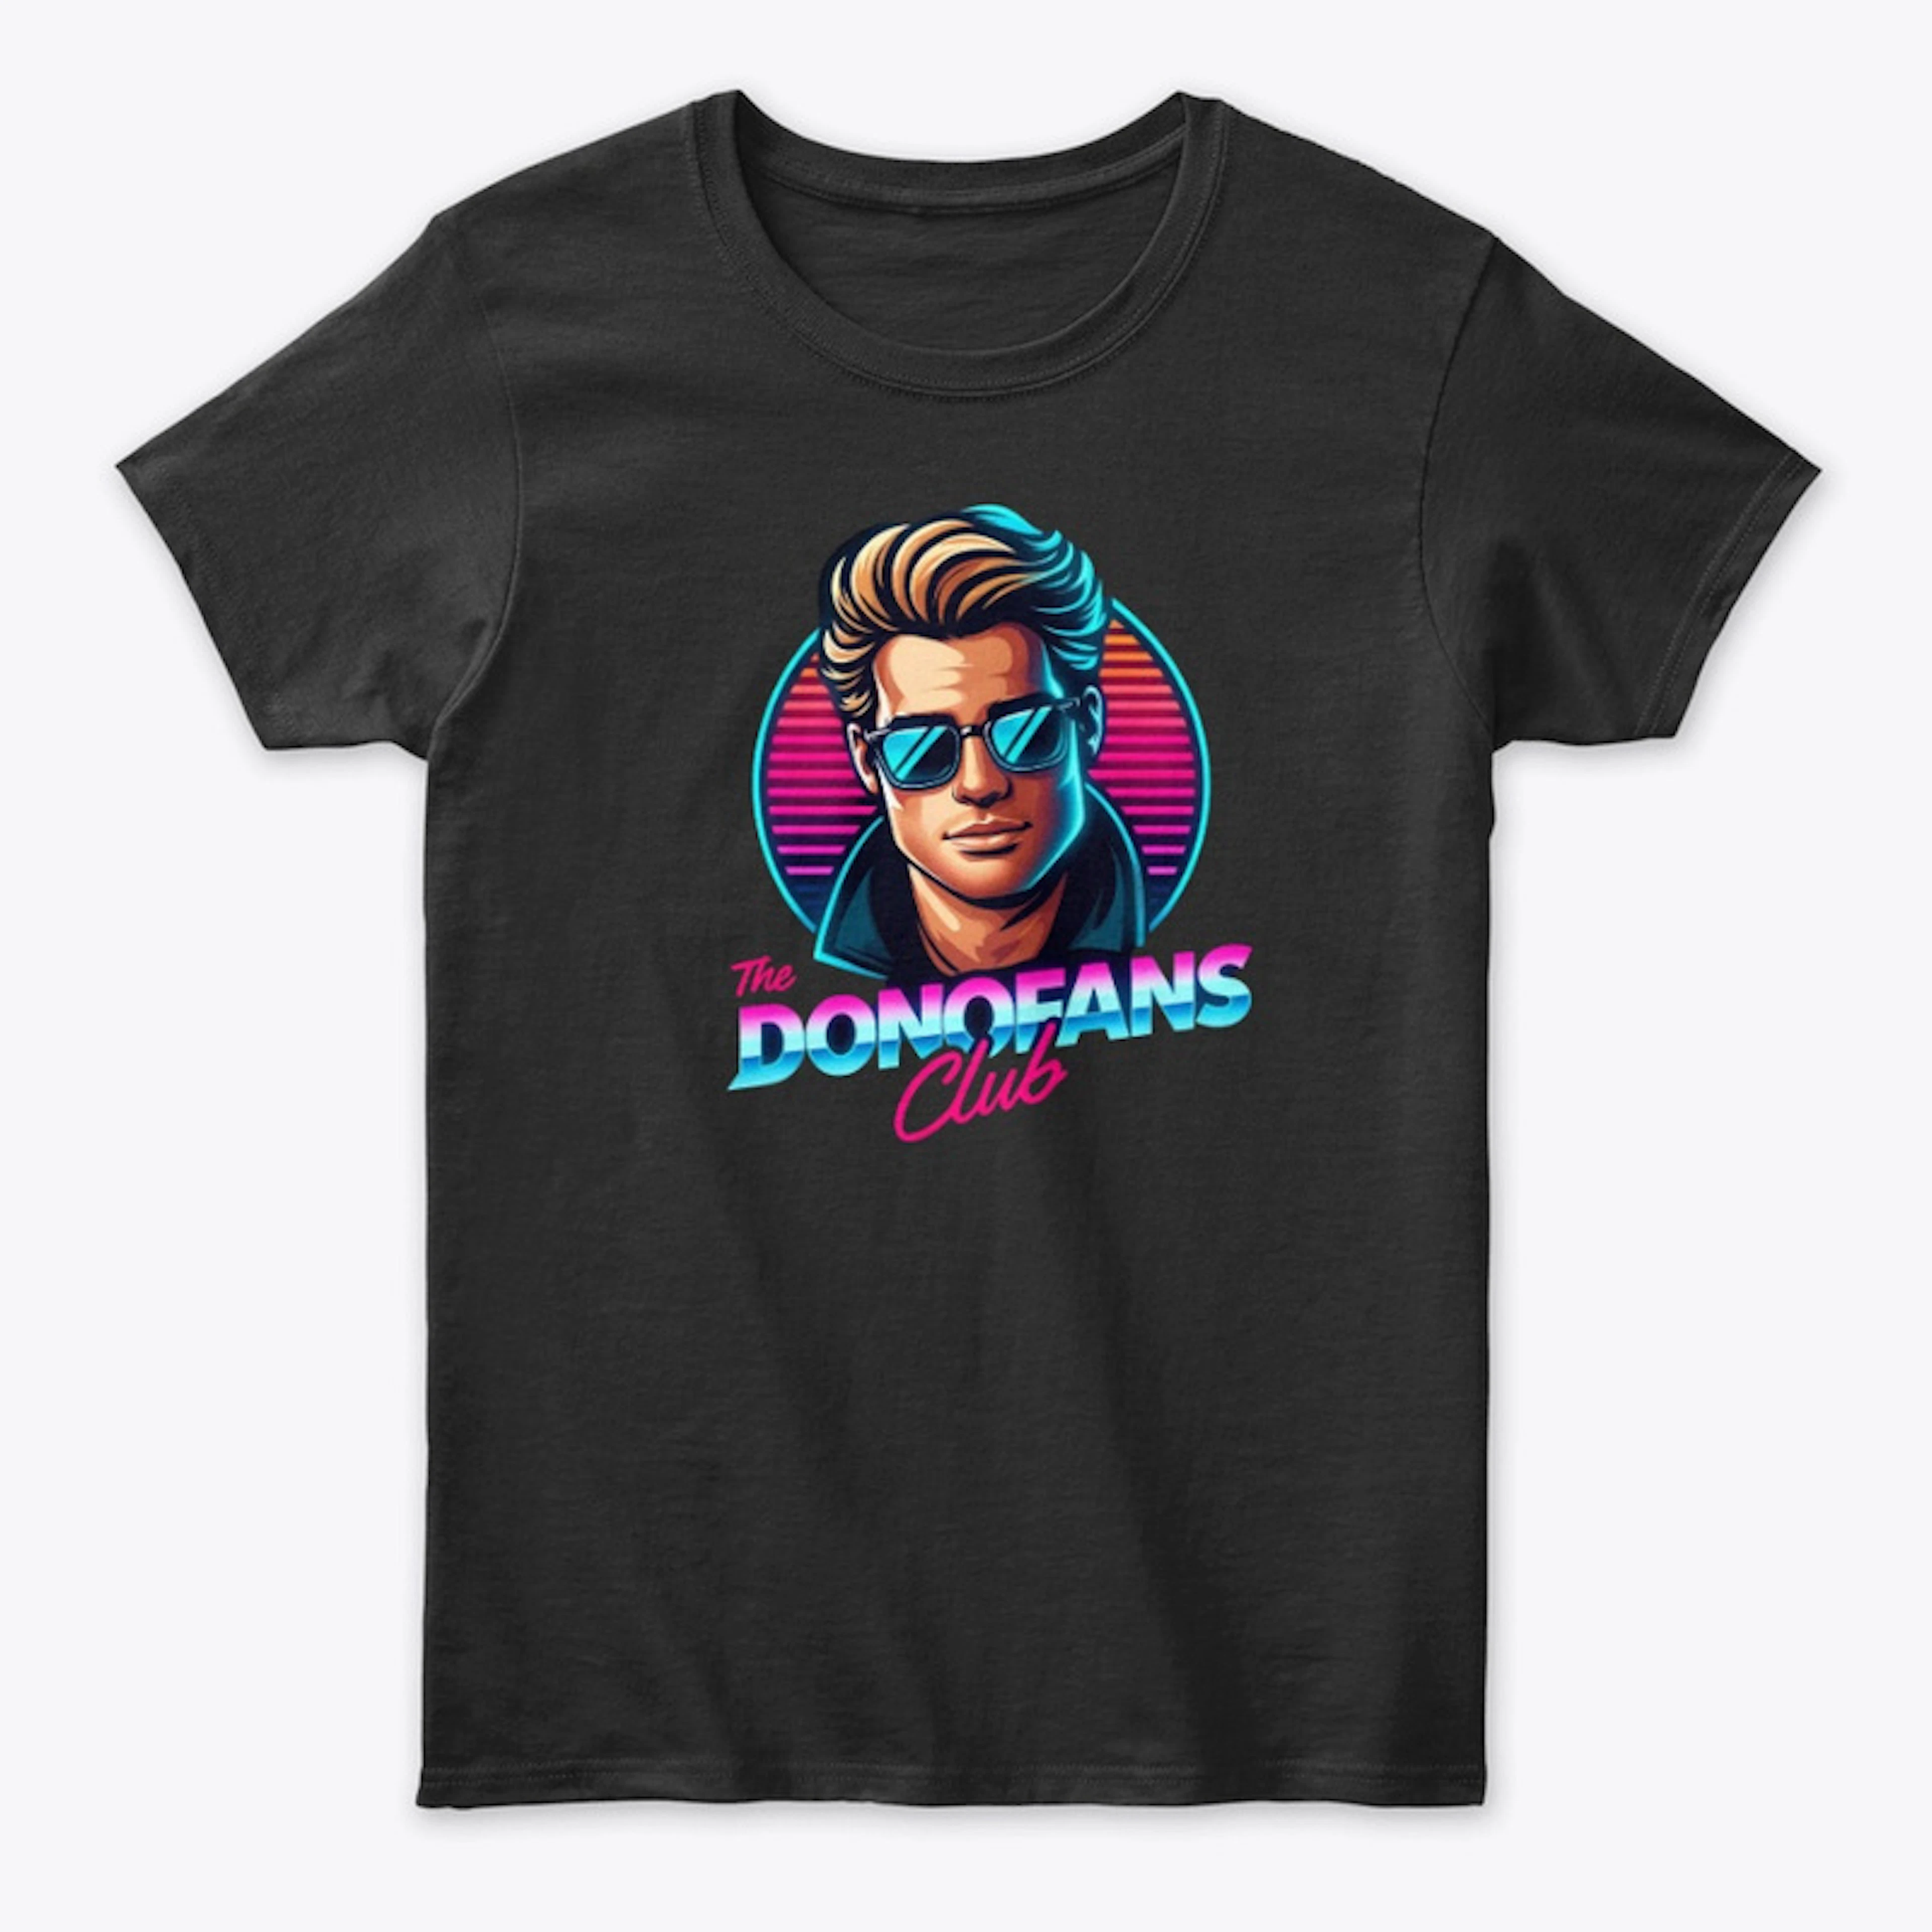 The DonoFans Club